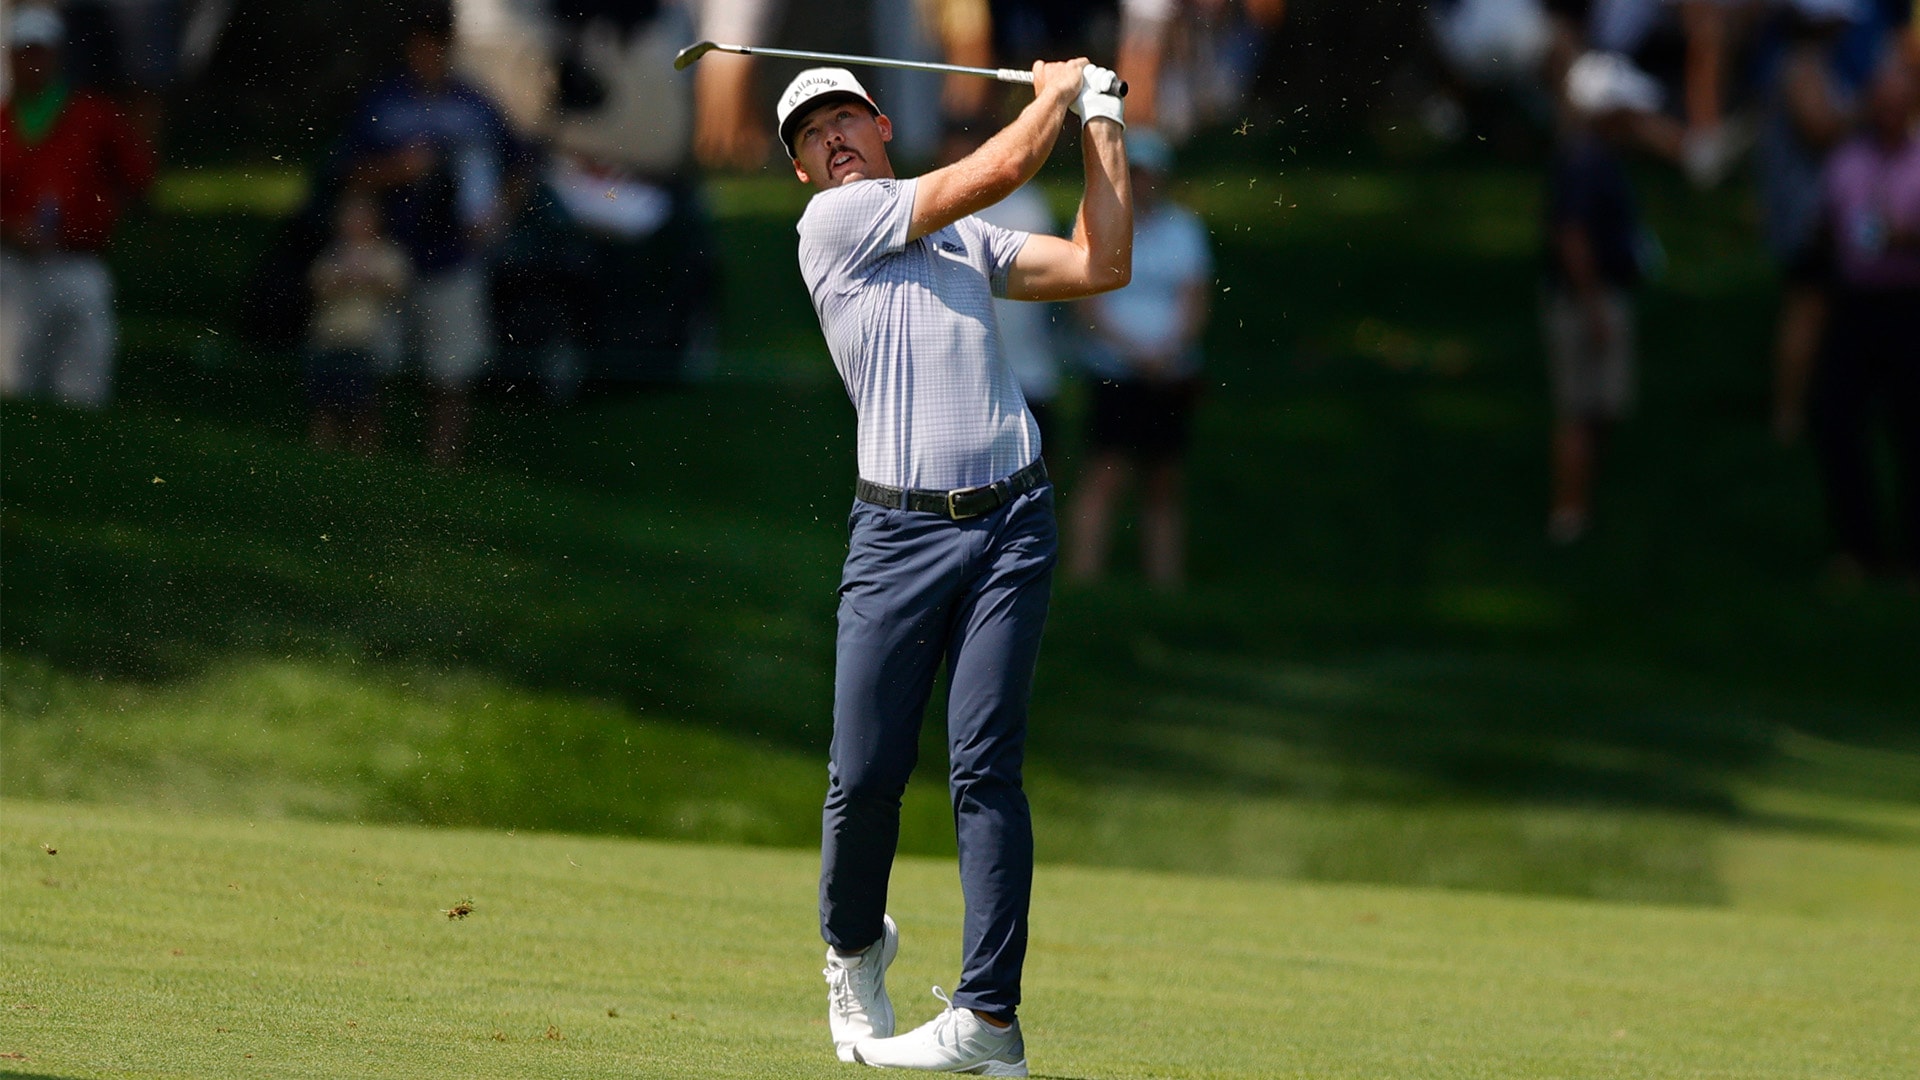 As Ryder Cup looms, Sam Burns shares BMW lead with John Rahm, Rory McIlroy